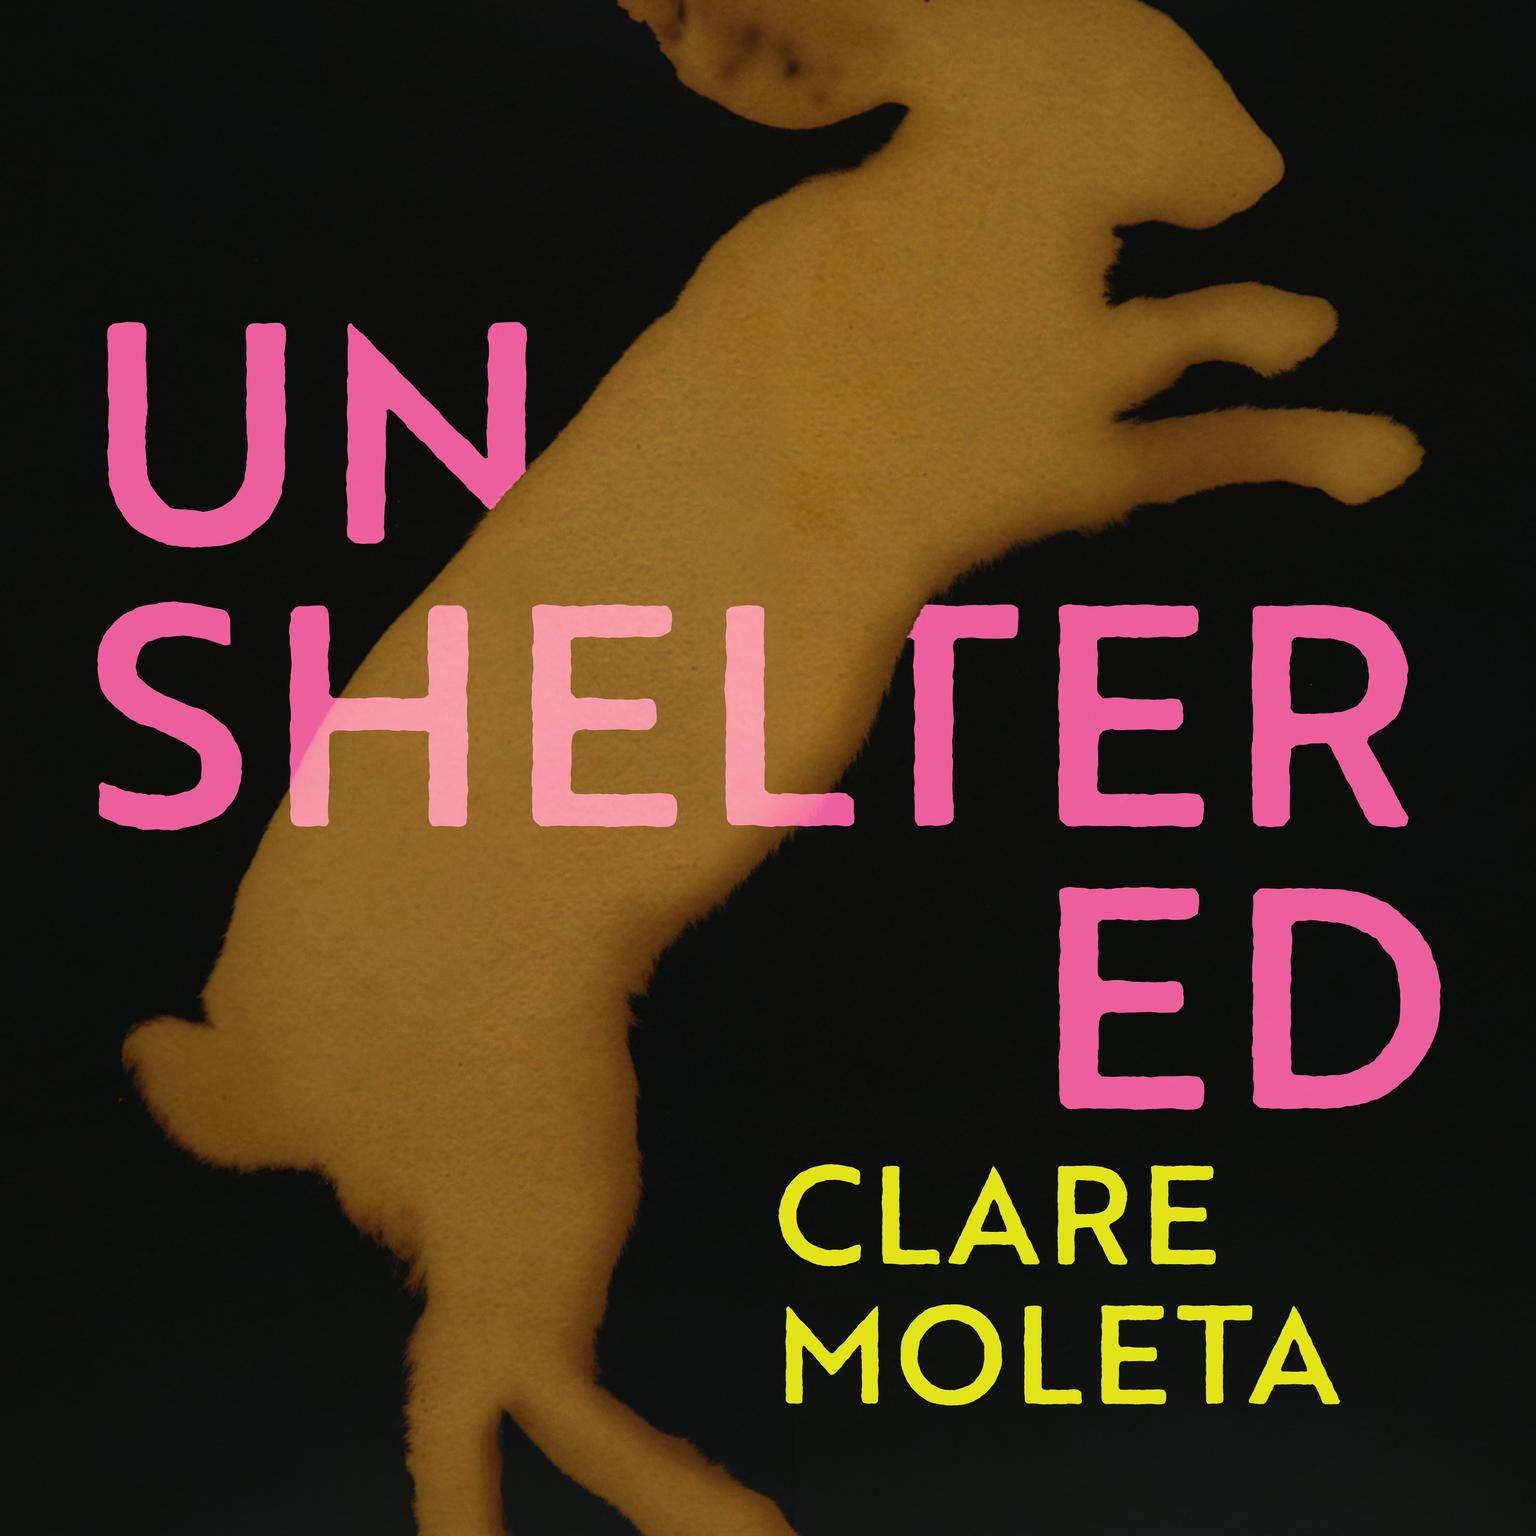 Unsheltered Audiobook, by Clare Moleta